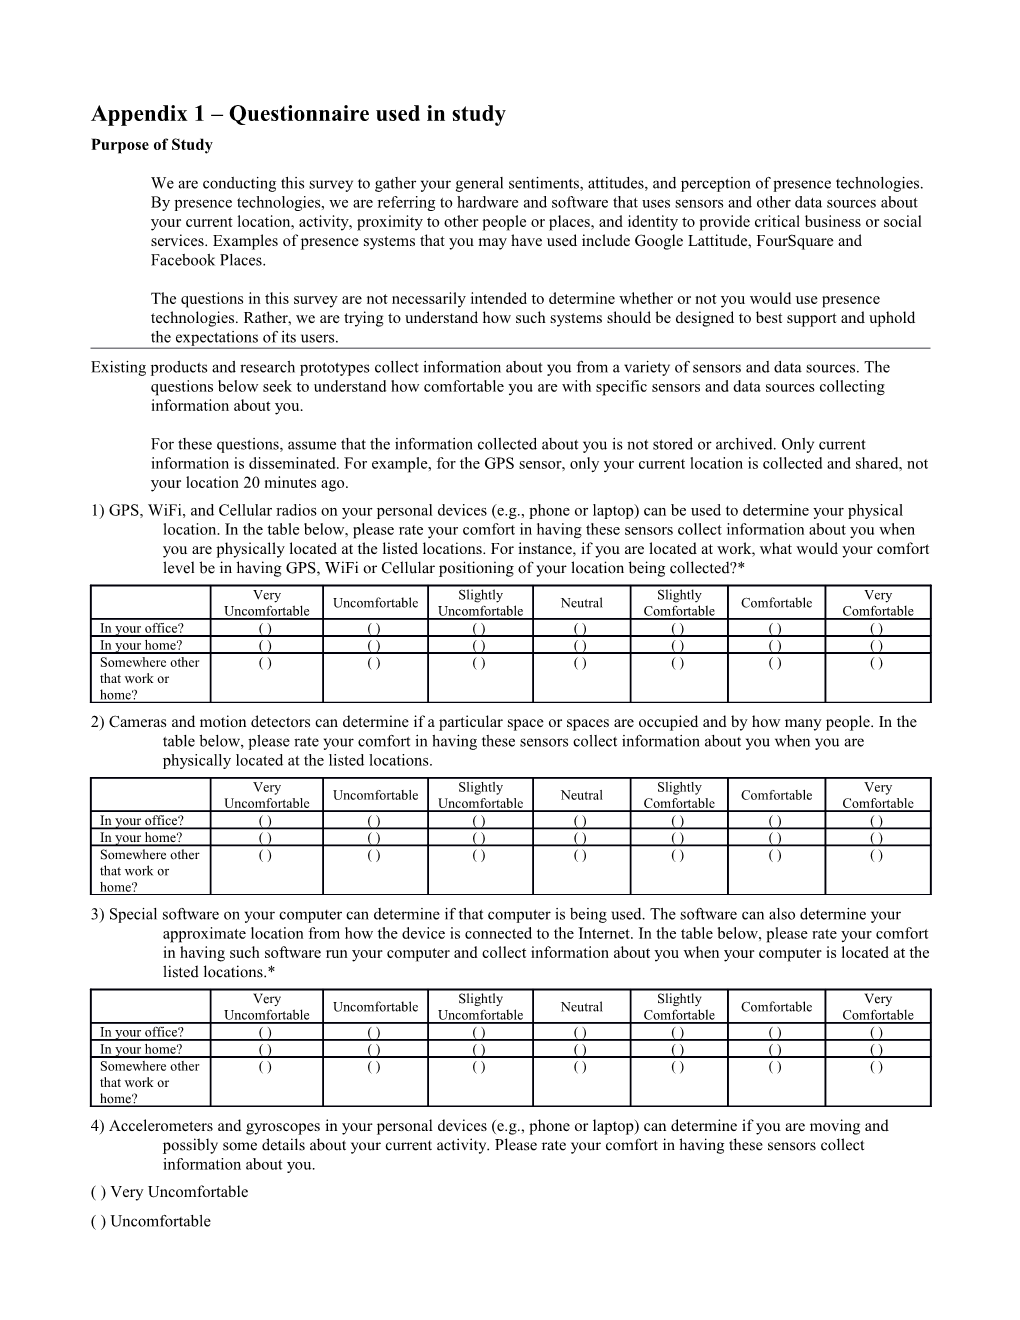 Appendix 1 Questionnaire Used in Study